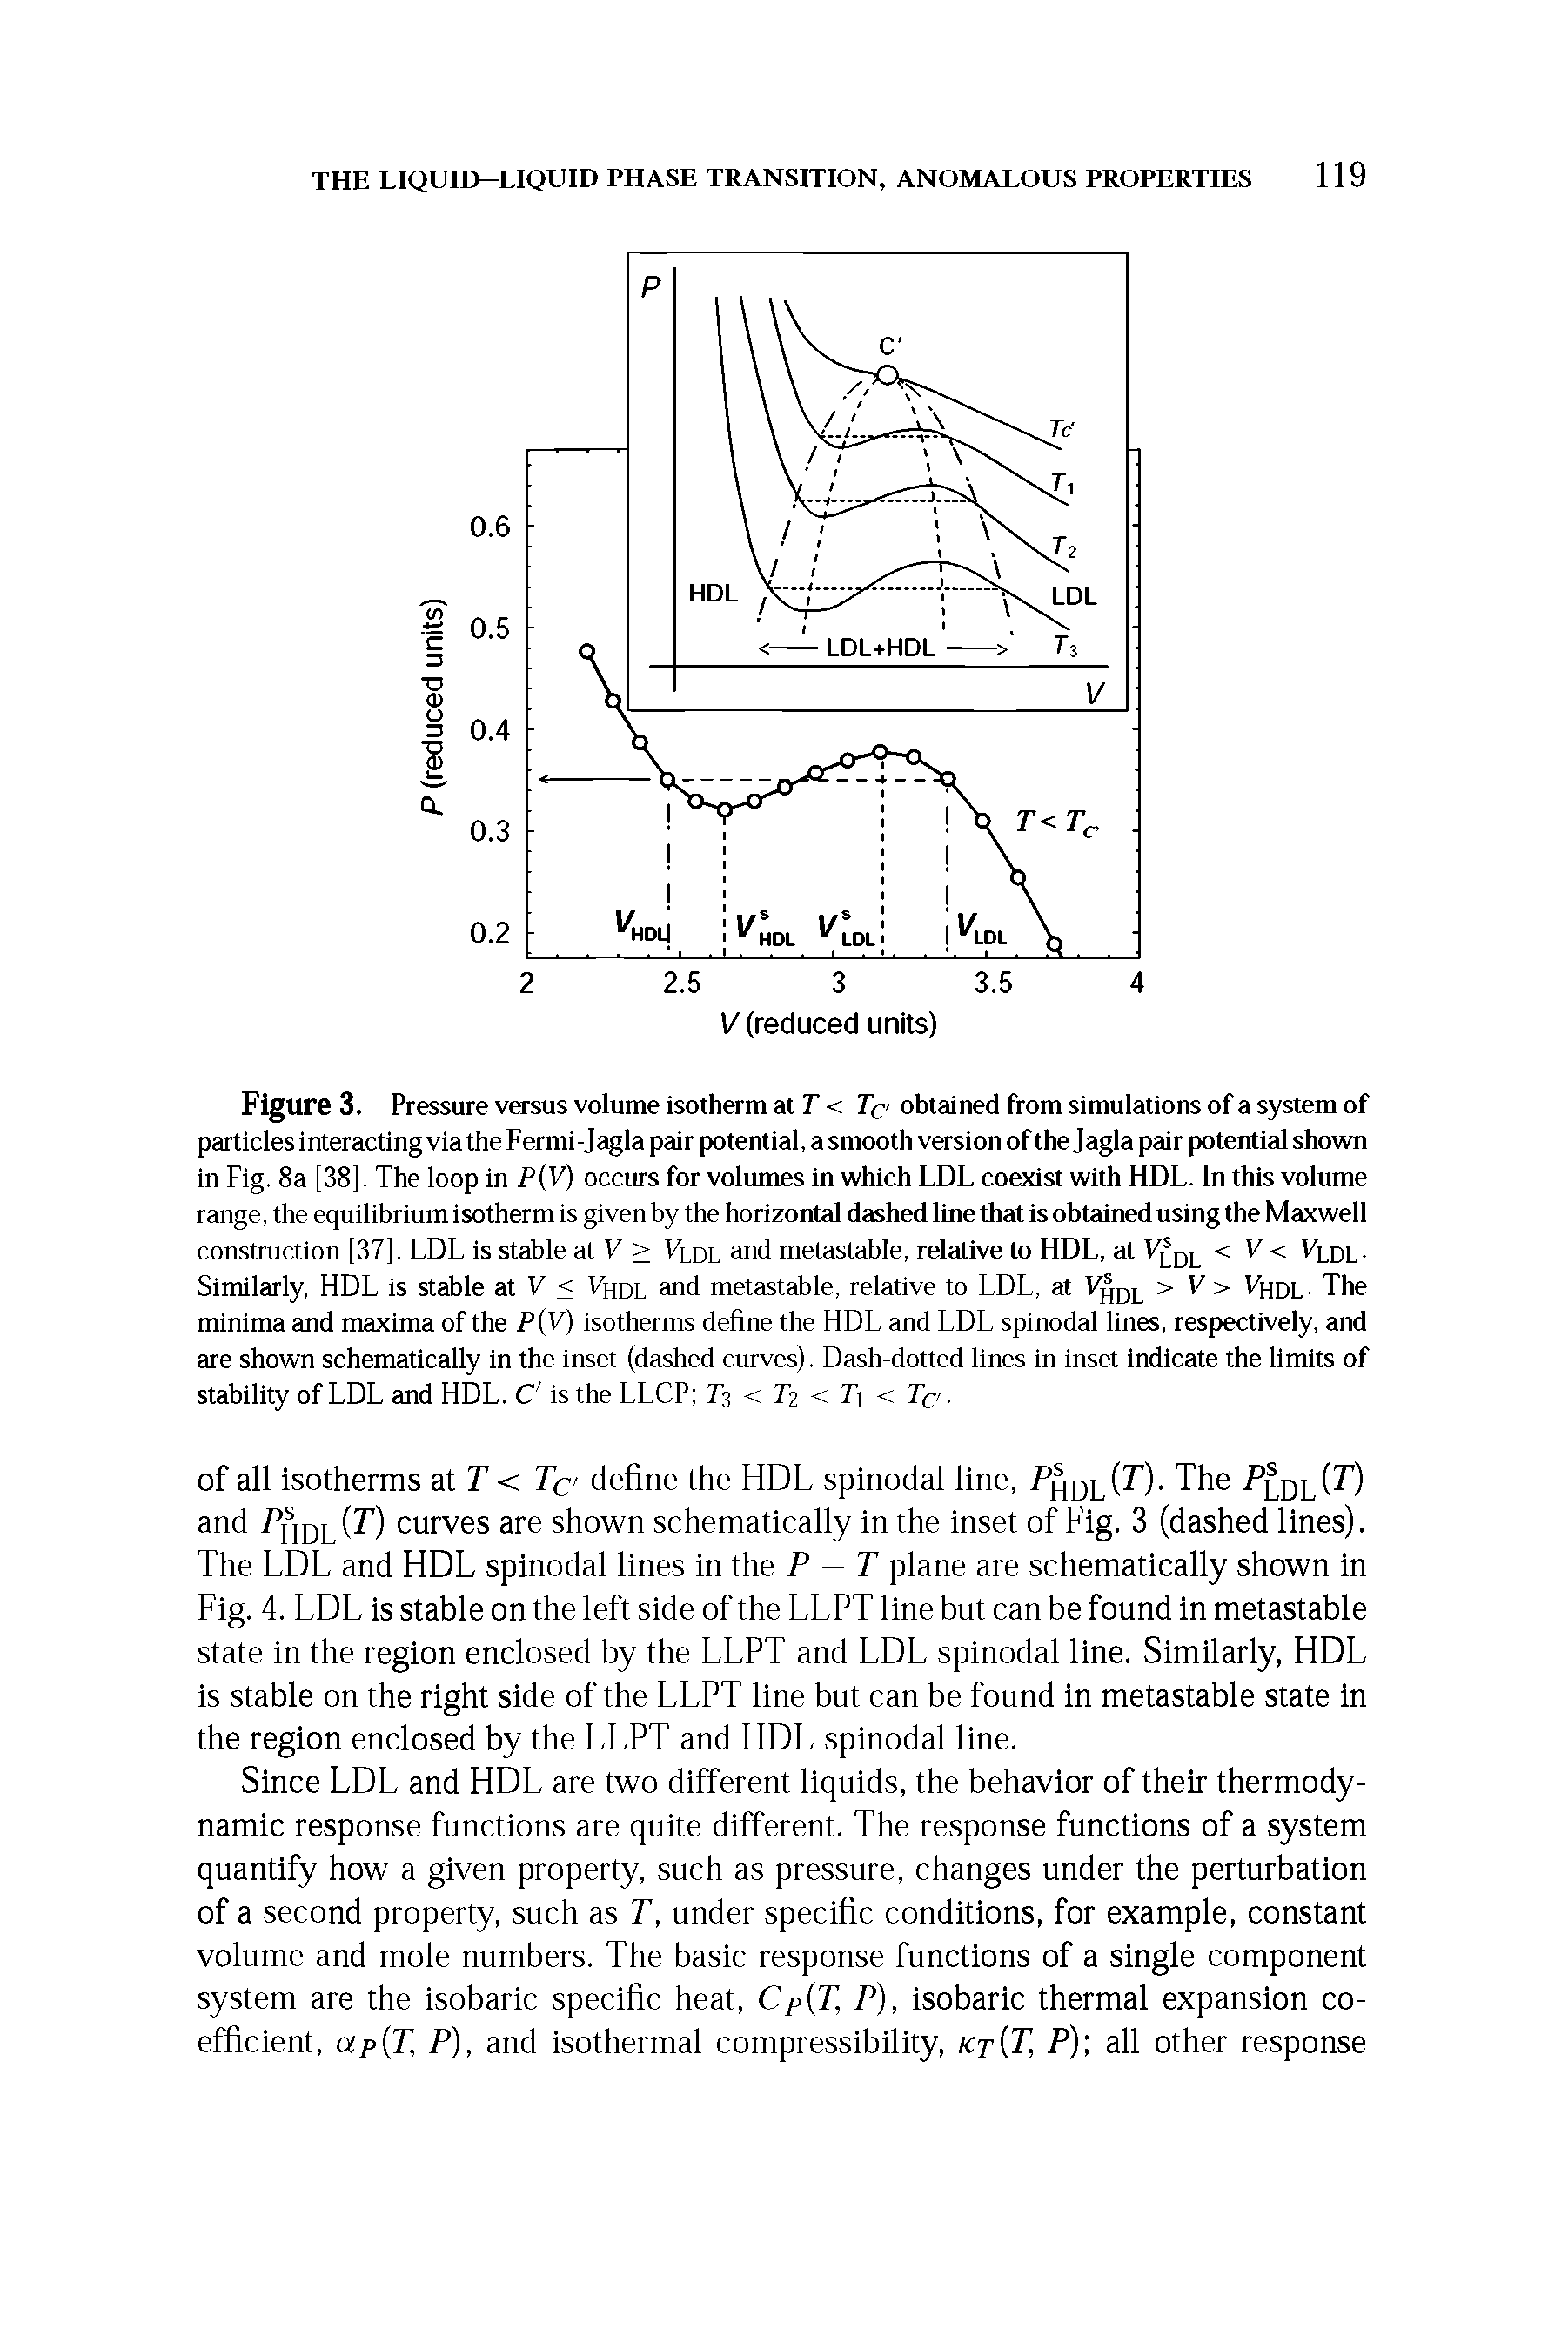 Figure 3. Pressure versus volume isotherm at T < Tc obtained from simulations of a system of particles interacting via the Fermi-Jagla pair potential, a smooth version of the Jagla pair potential shown...